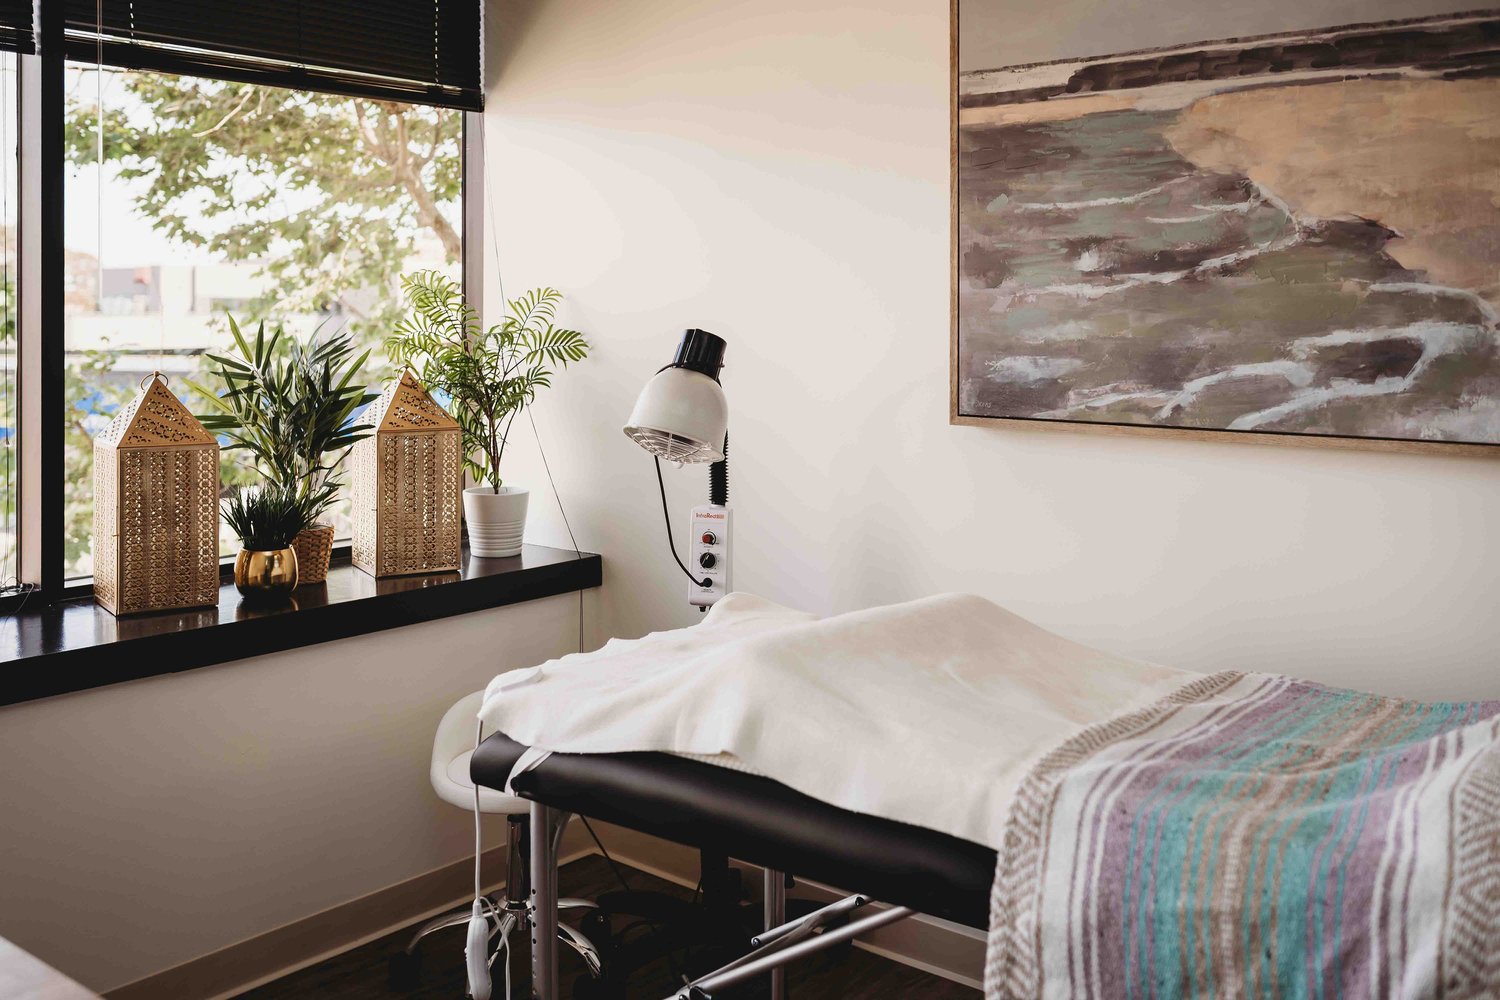 Acupuncture Therapy, a clean white room with plants and large framed art on the wall. There's a medical bed with white and colorful sheets on it which a lamp hovering above the bed